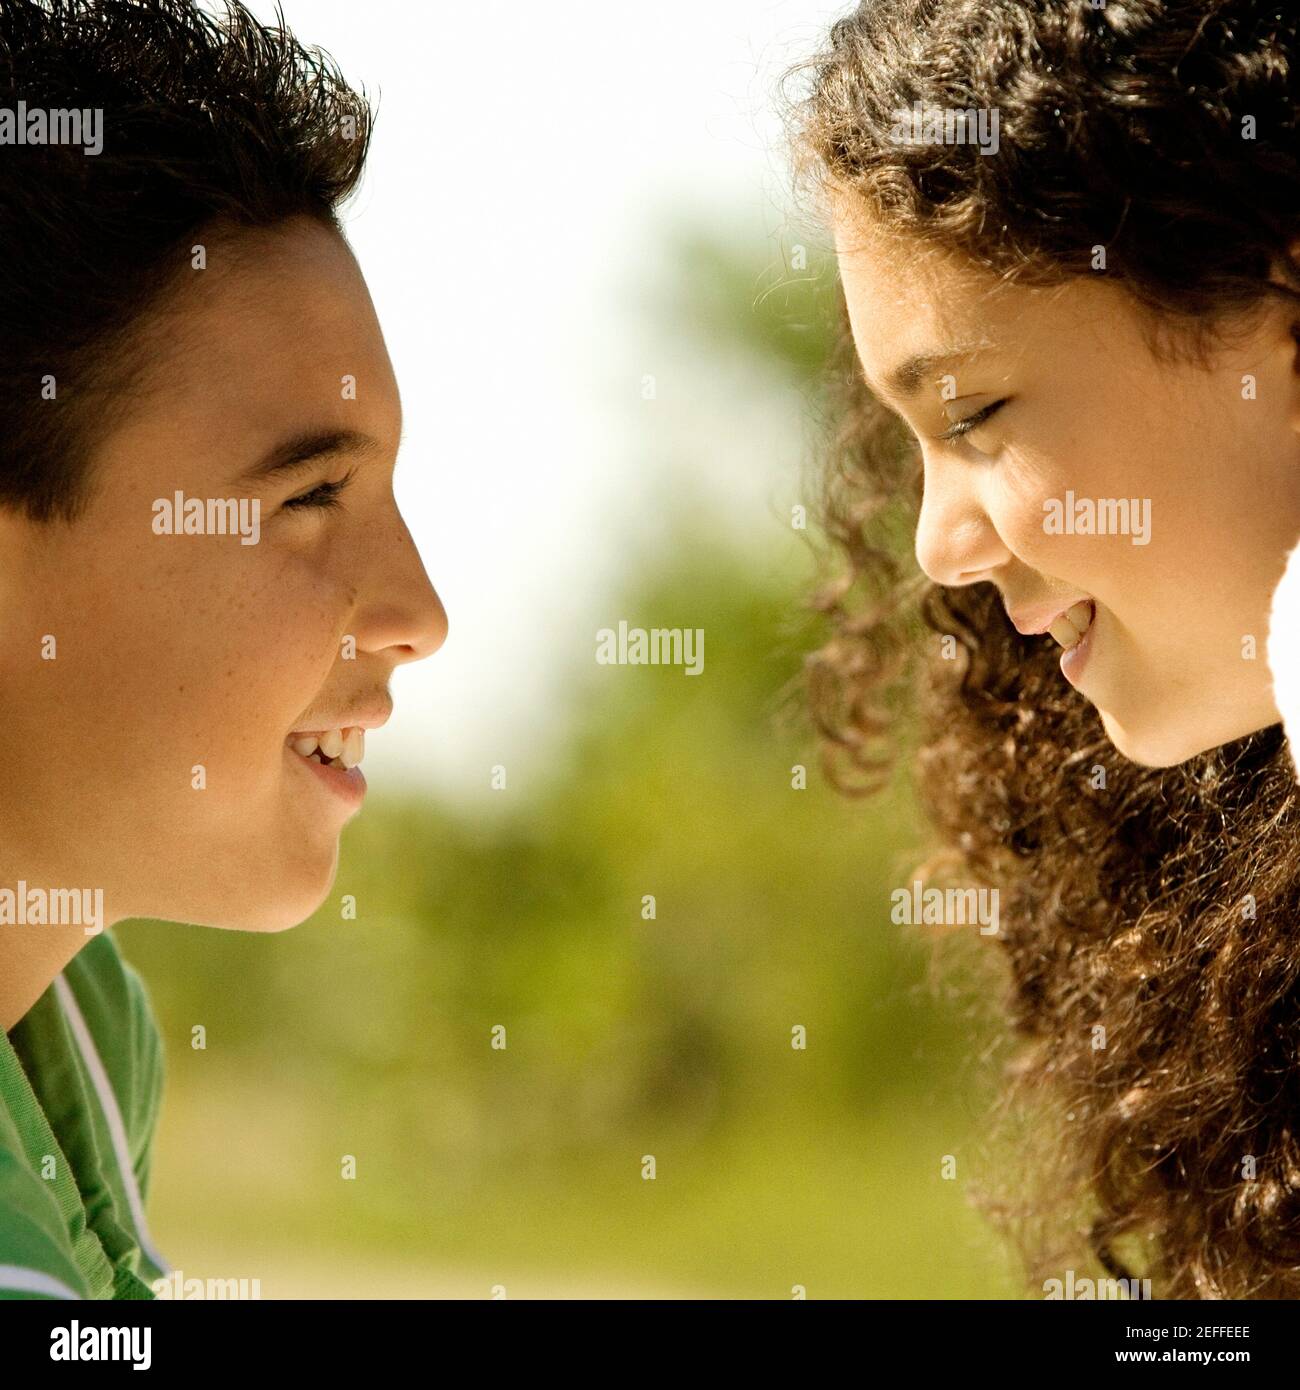 Close-up of a boy and a girl looking at each other smiling Stock Photo